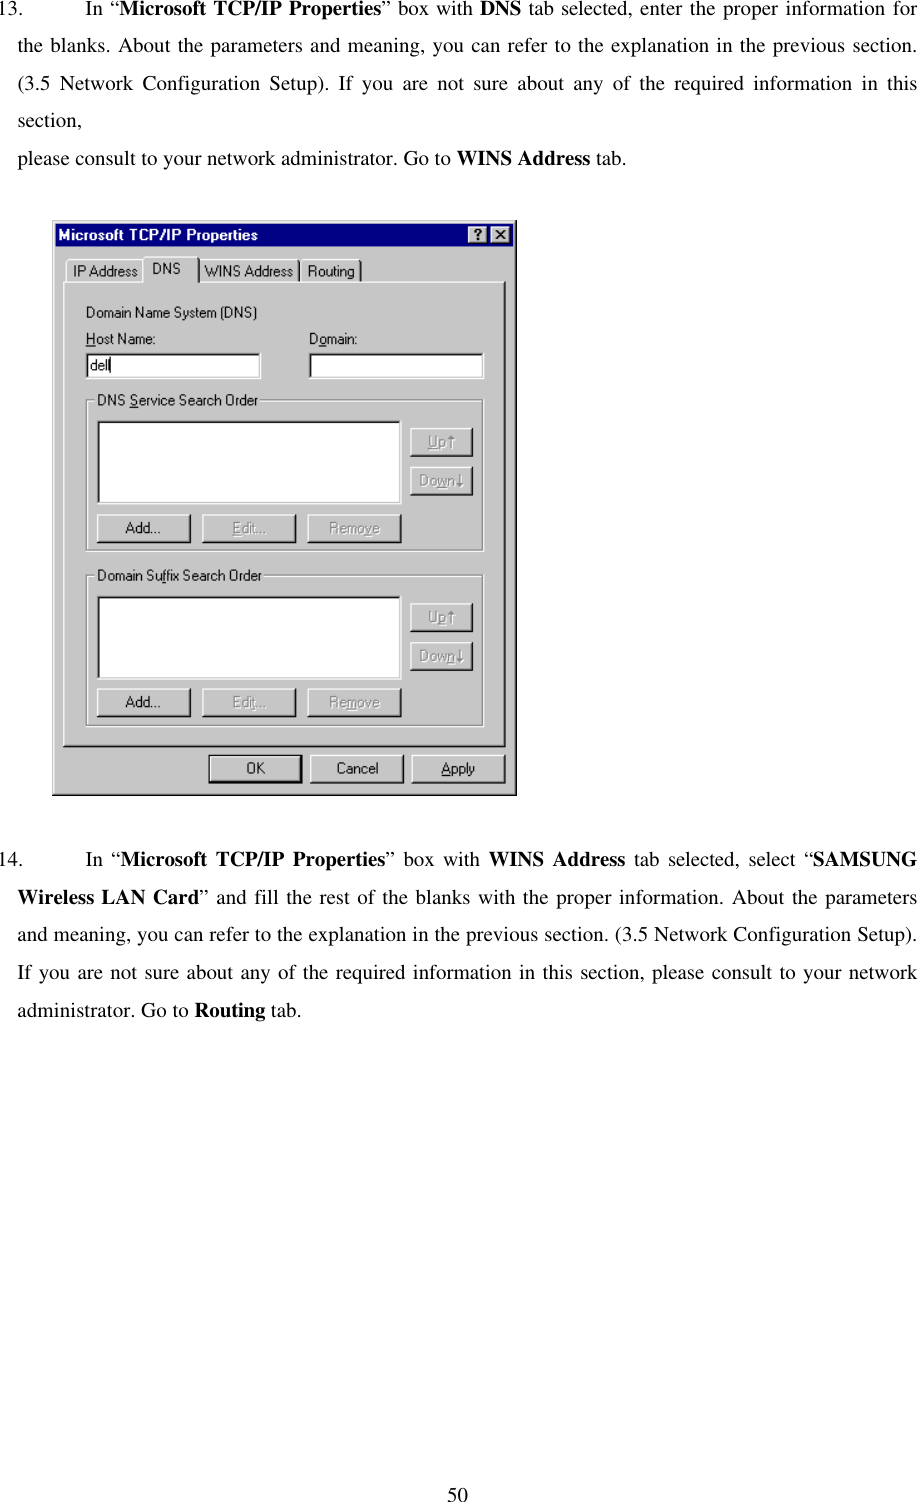 5013. In “Microsoft TCP/IP Properties” box with DNS tab selected, enter the proper information forthe blanks. About the parameters and meaning, you can refer to the explanation in the previous section.(3.5 Network Configuration Setup). If you are not sure about any of the required information in thissection,please consult to your network administrator. Go to WINS Address tab.          14. In “Microsoft TCP/IP Properties” box with WINS Address tab selected, select “SAMSUNGWireless LAN Card” and fill the rest of the blanks with the proper information. About the parametersand meaning, you can refer to the explanation in the previous section. (3.5 Network Configuration Setup).If you are not sure about any of the required information in this section, please consult to your networkadministrator. Go to Routing tab.